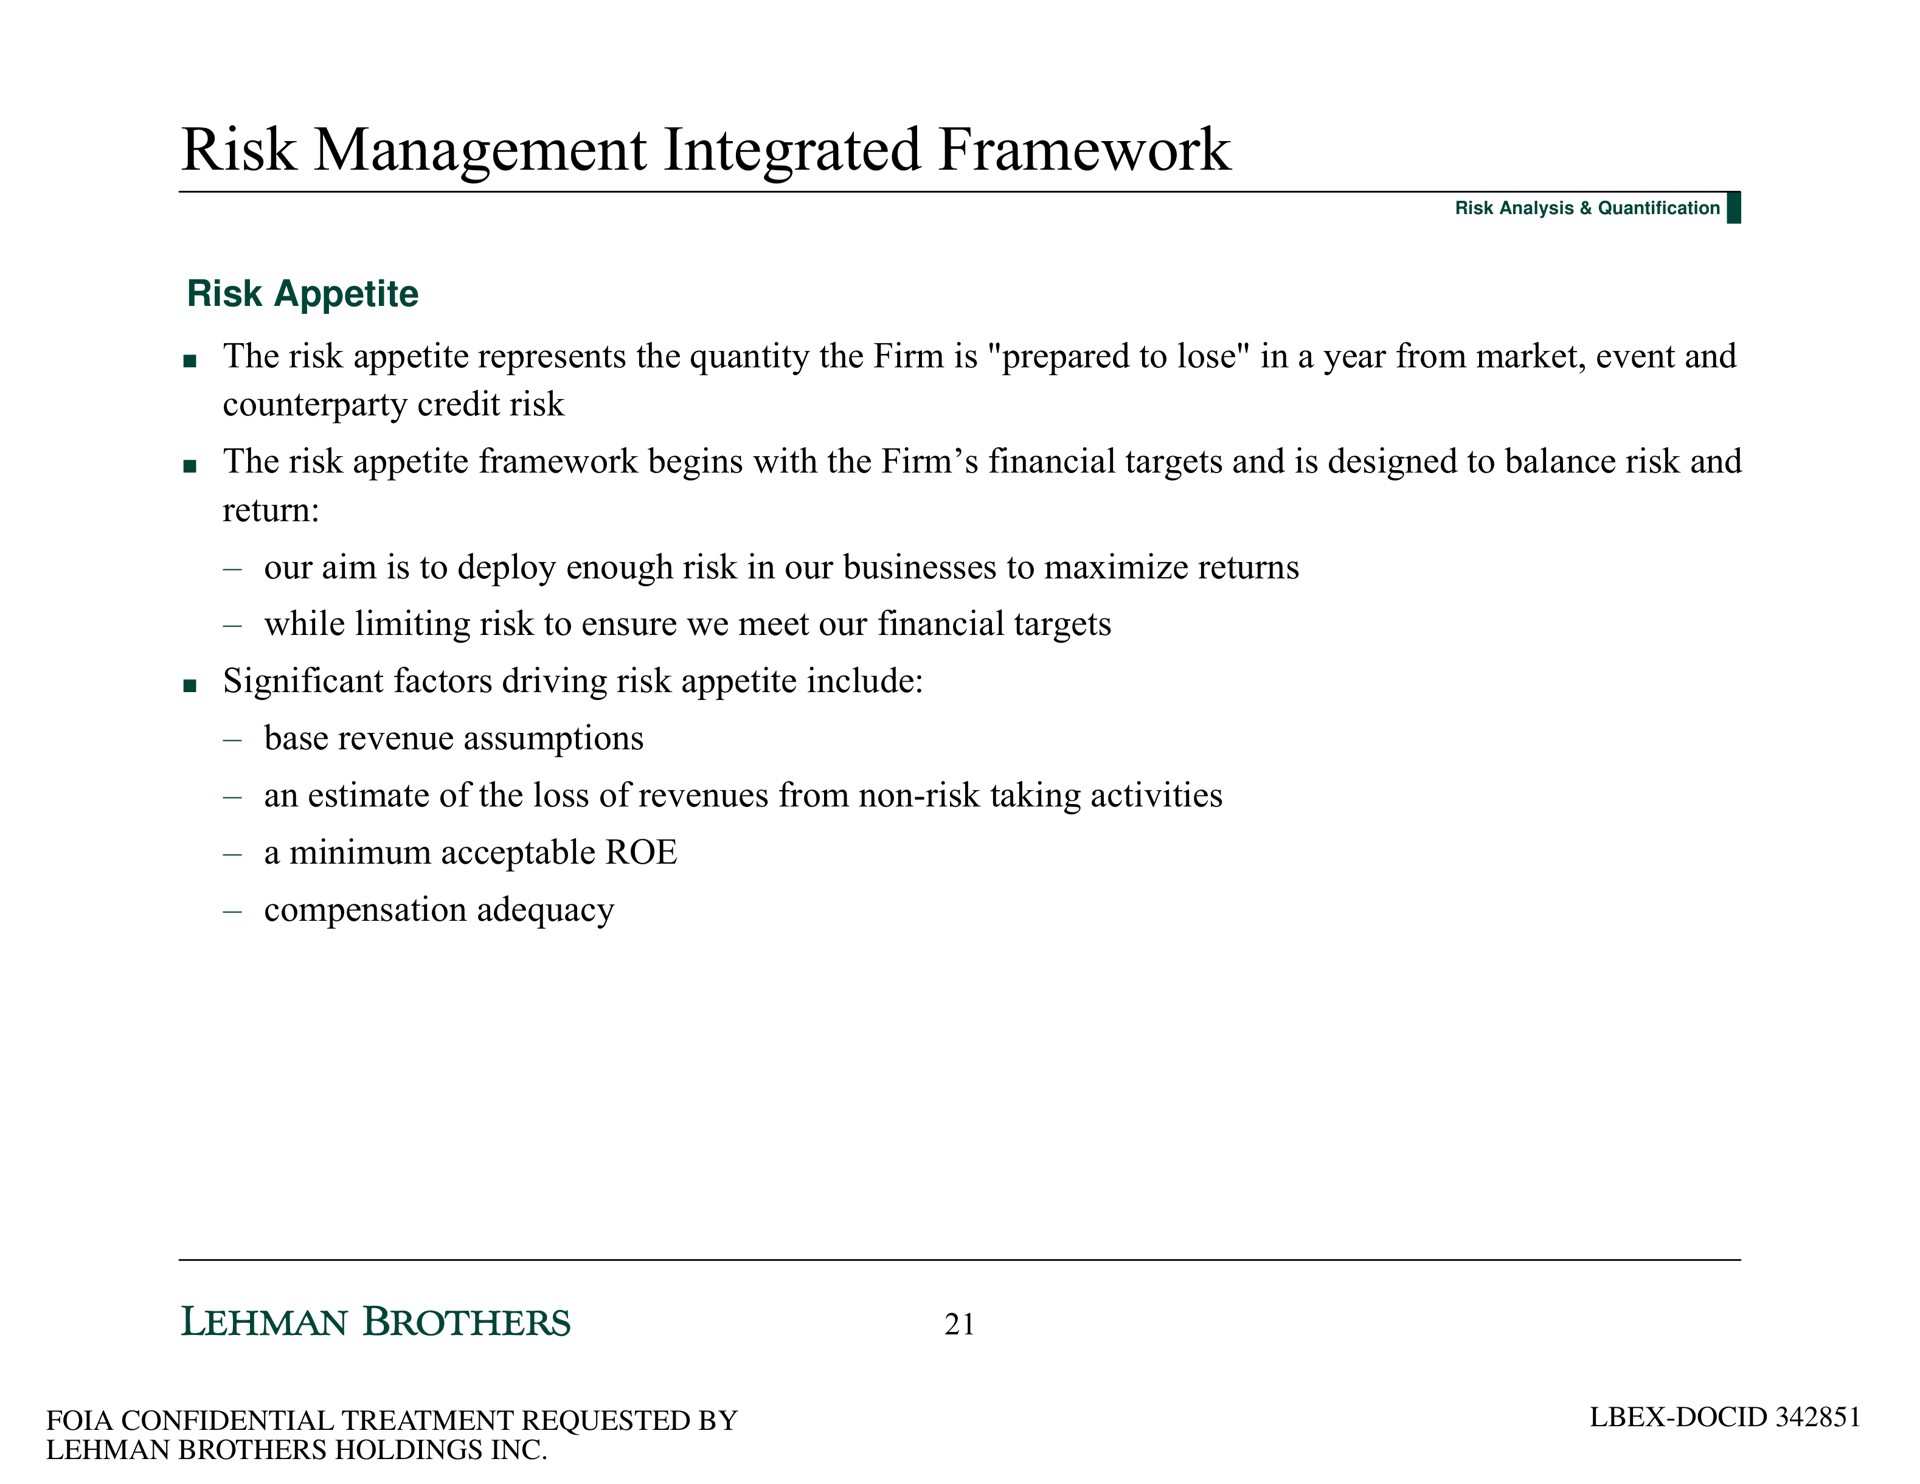 risk management integrated framework risk appetite the risk appetite represents the quantity the firm is prepared to lose in a year from market event and credit risk the risk appetite framework begins with the firm financial targets and is designed to balance risk and return our aim is to deploy enough risk in our businesses to maximize returns while limiting risk to ensure we meet our financial targets significant factors driving risk appetite include base revenue assumptions an estimate of the loss of revenues from non risk taking activities a minimum acceptable roe compensation adequacy | Lehman Brothers